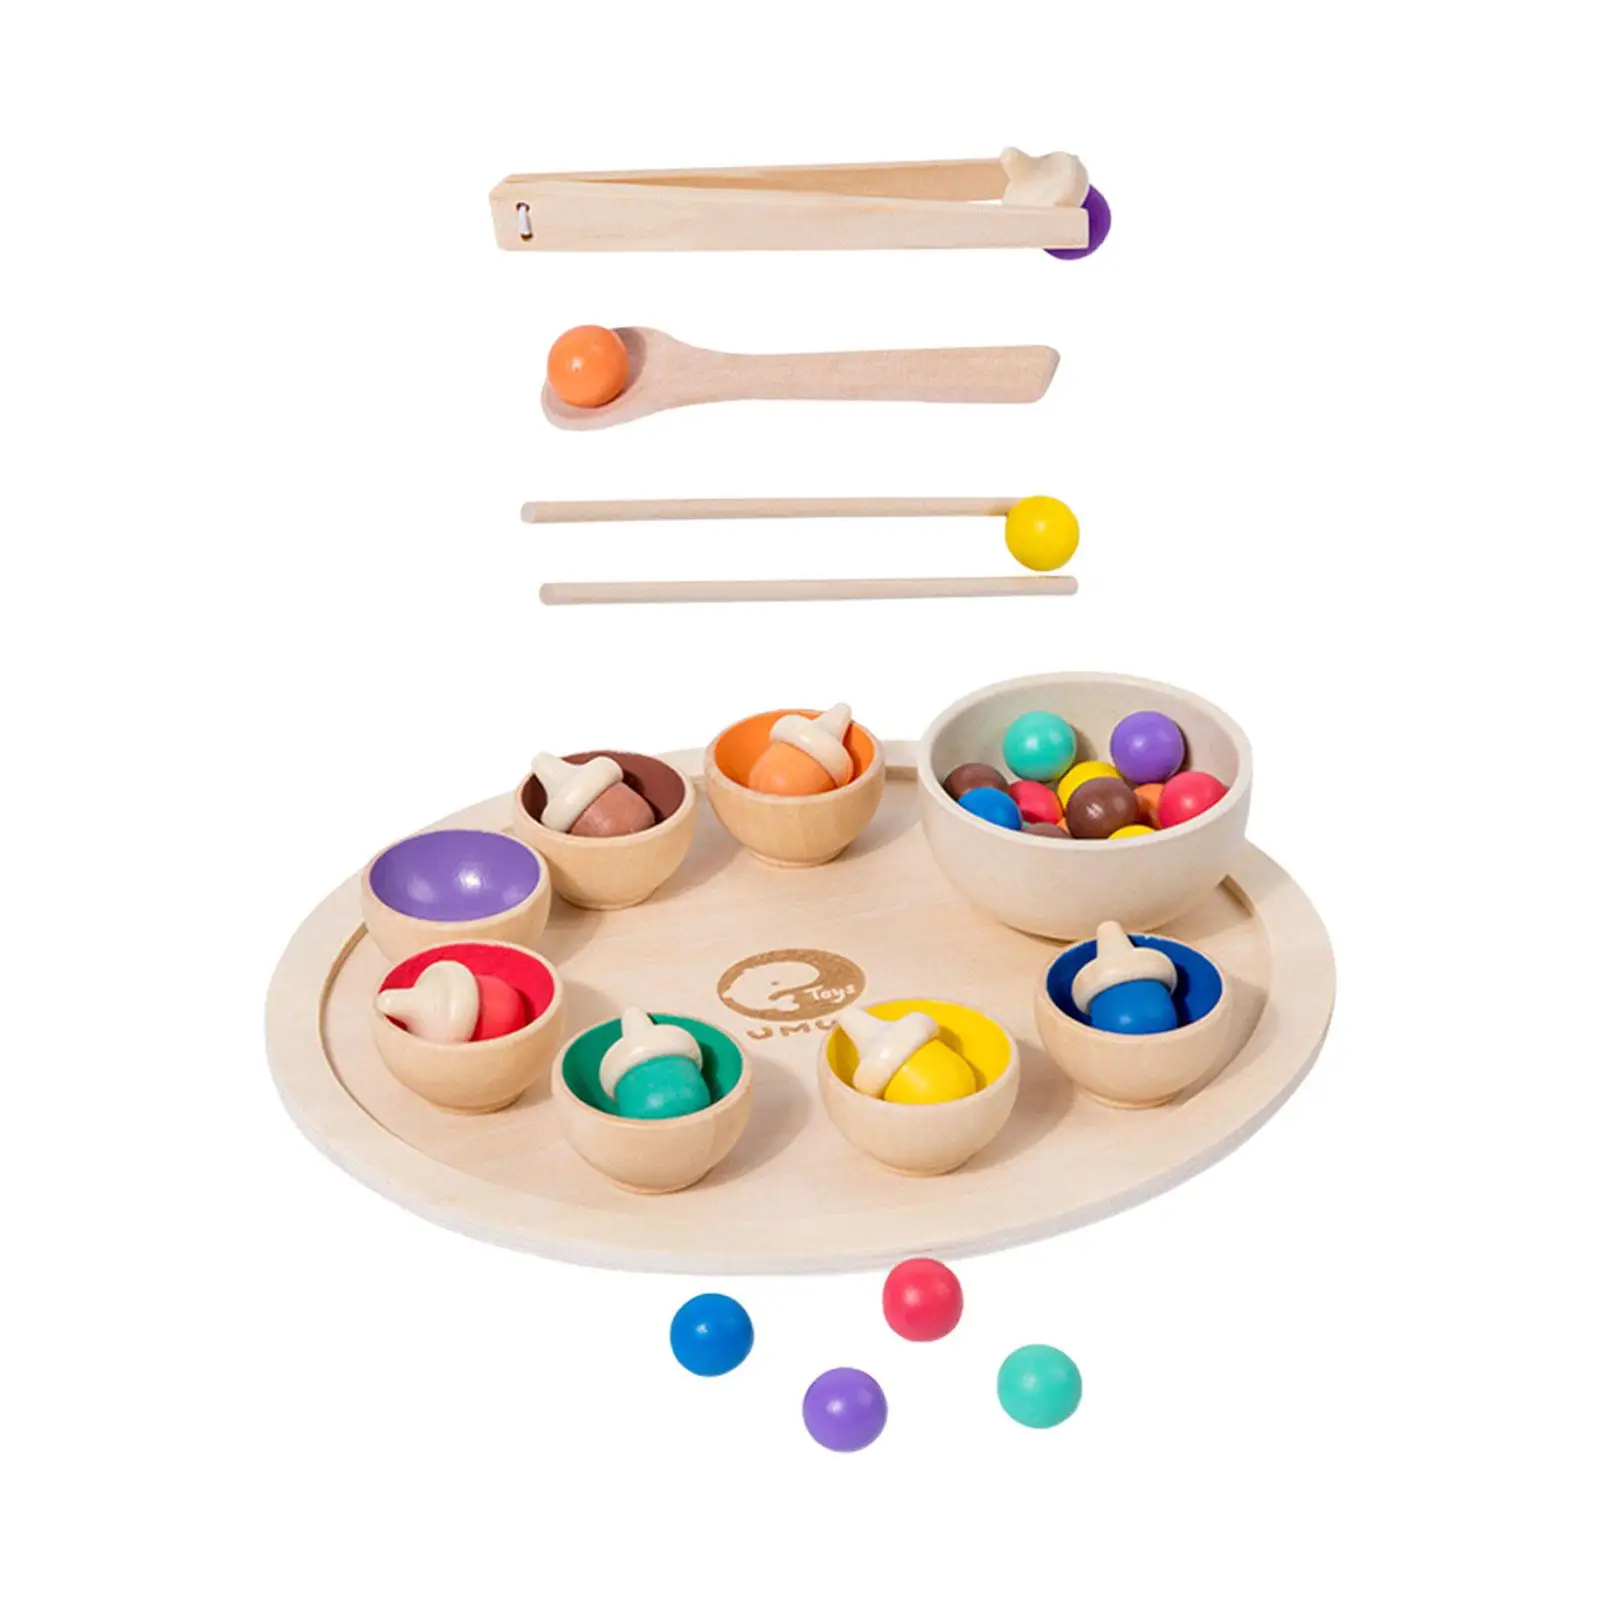 Montessori Bowls Toy Balls Matching Matching and Counting Toy Fine Motor Development Game Wooden Rainbow Toys for Toddlers Baby